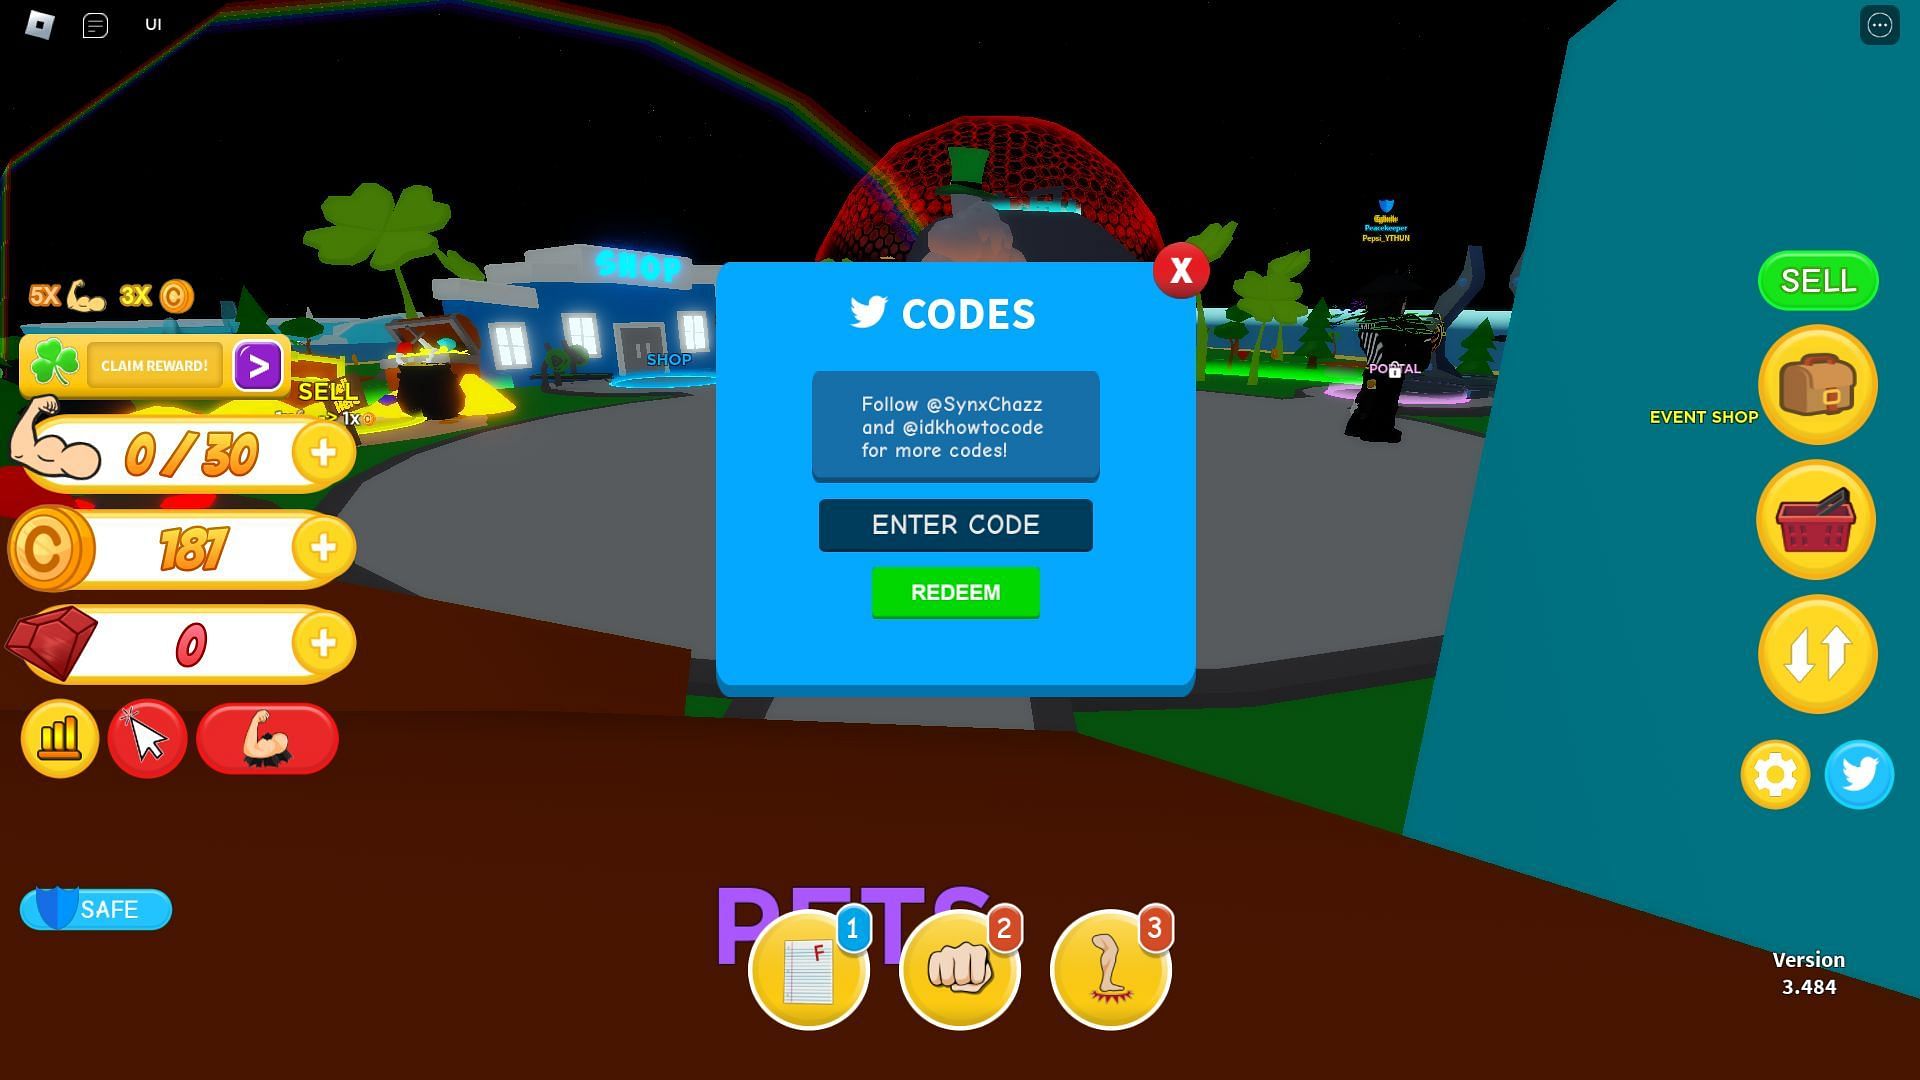 Active codes for Get Huge Simulator (Image via Roblox)